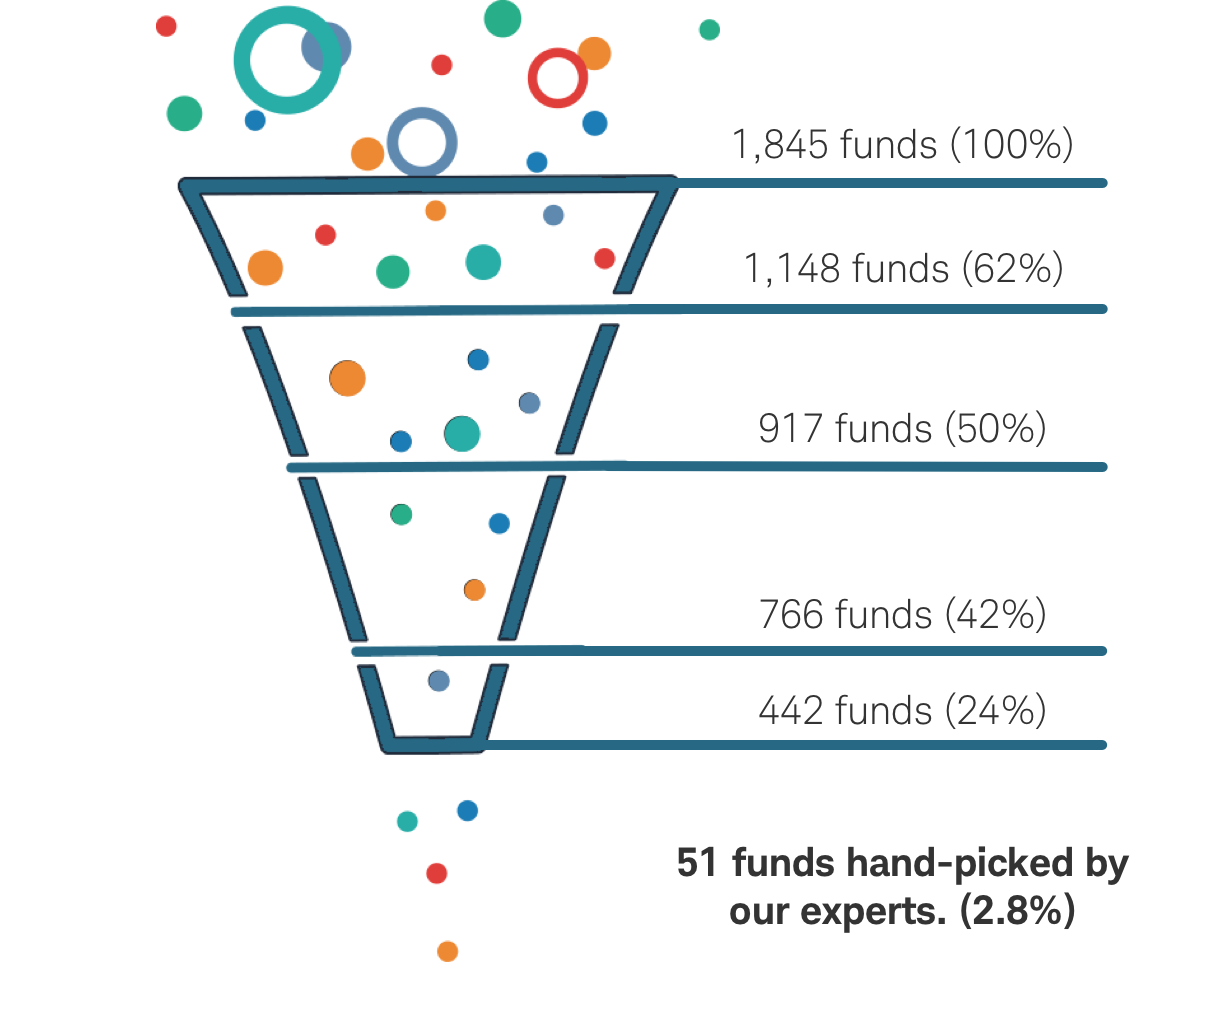 1,845 funds (100%), 1,148 funds (62%), 917 funds (50%), 766 funds(42%), 442 funds (24%), 51 funds hand-picked by our experts (2.8%)